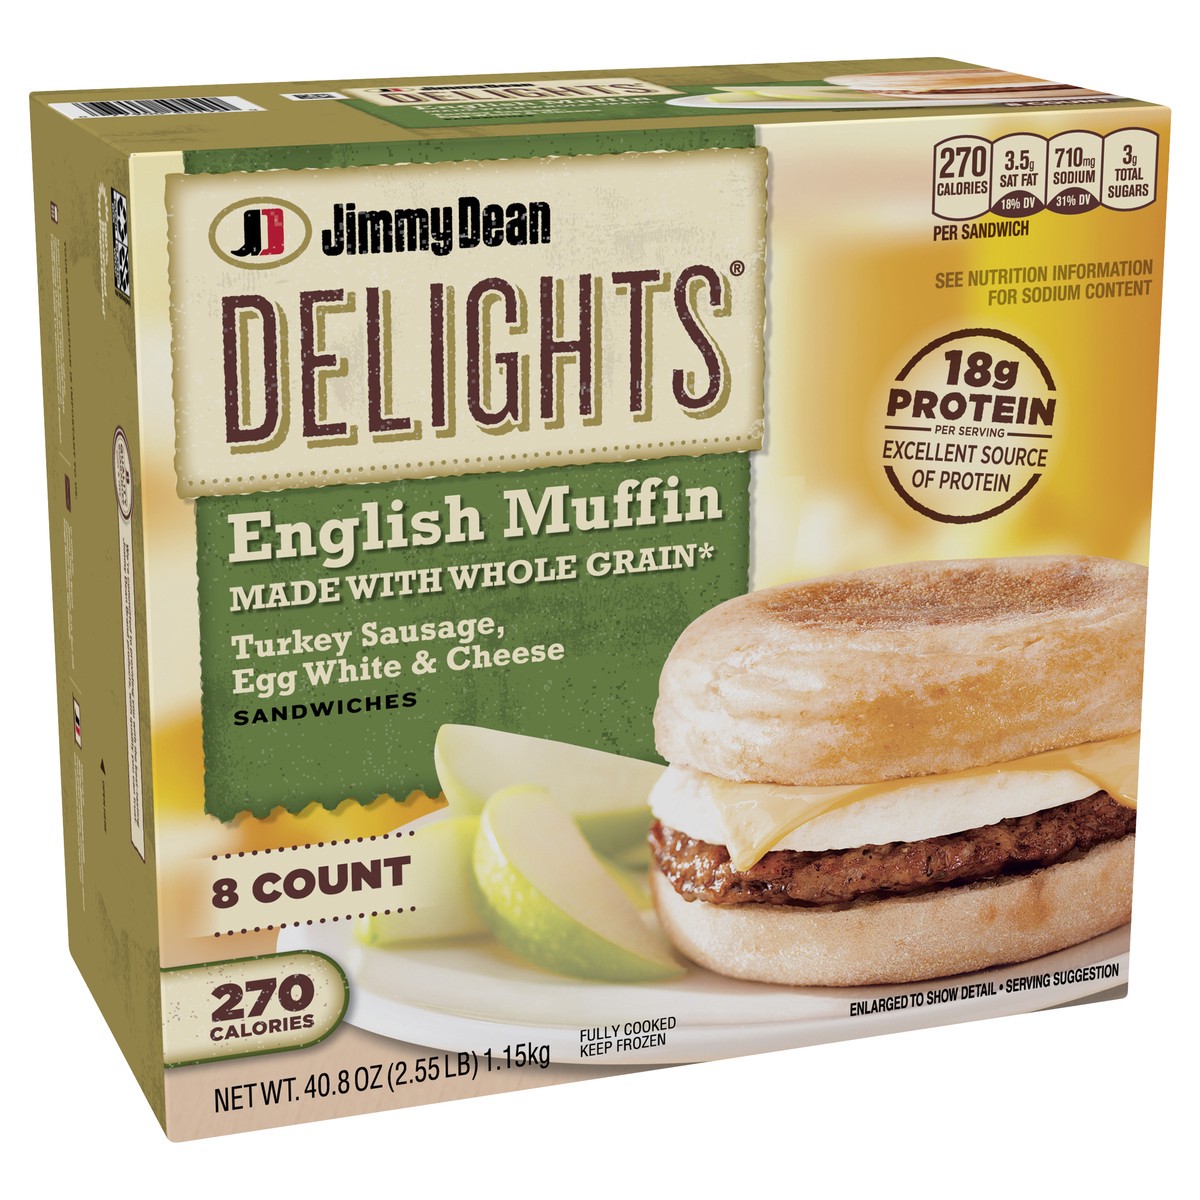 slide 2 of 9, Jimmy Dean Delights English Muffin Breakfast Sandwiches with Turkey Sausage, Egg White, and Cheese, Frozen, 8 Count, 1.16 kg